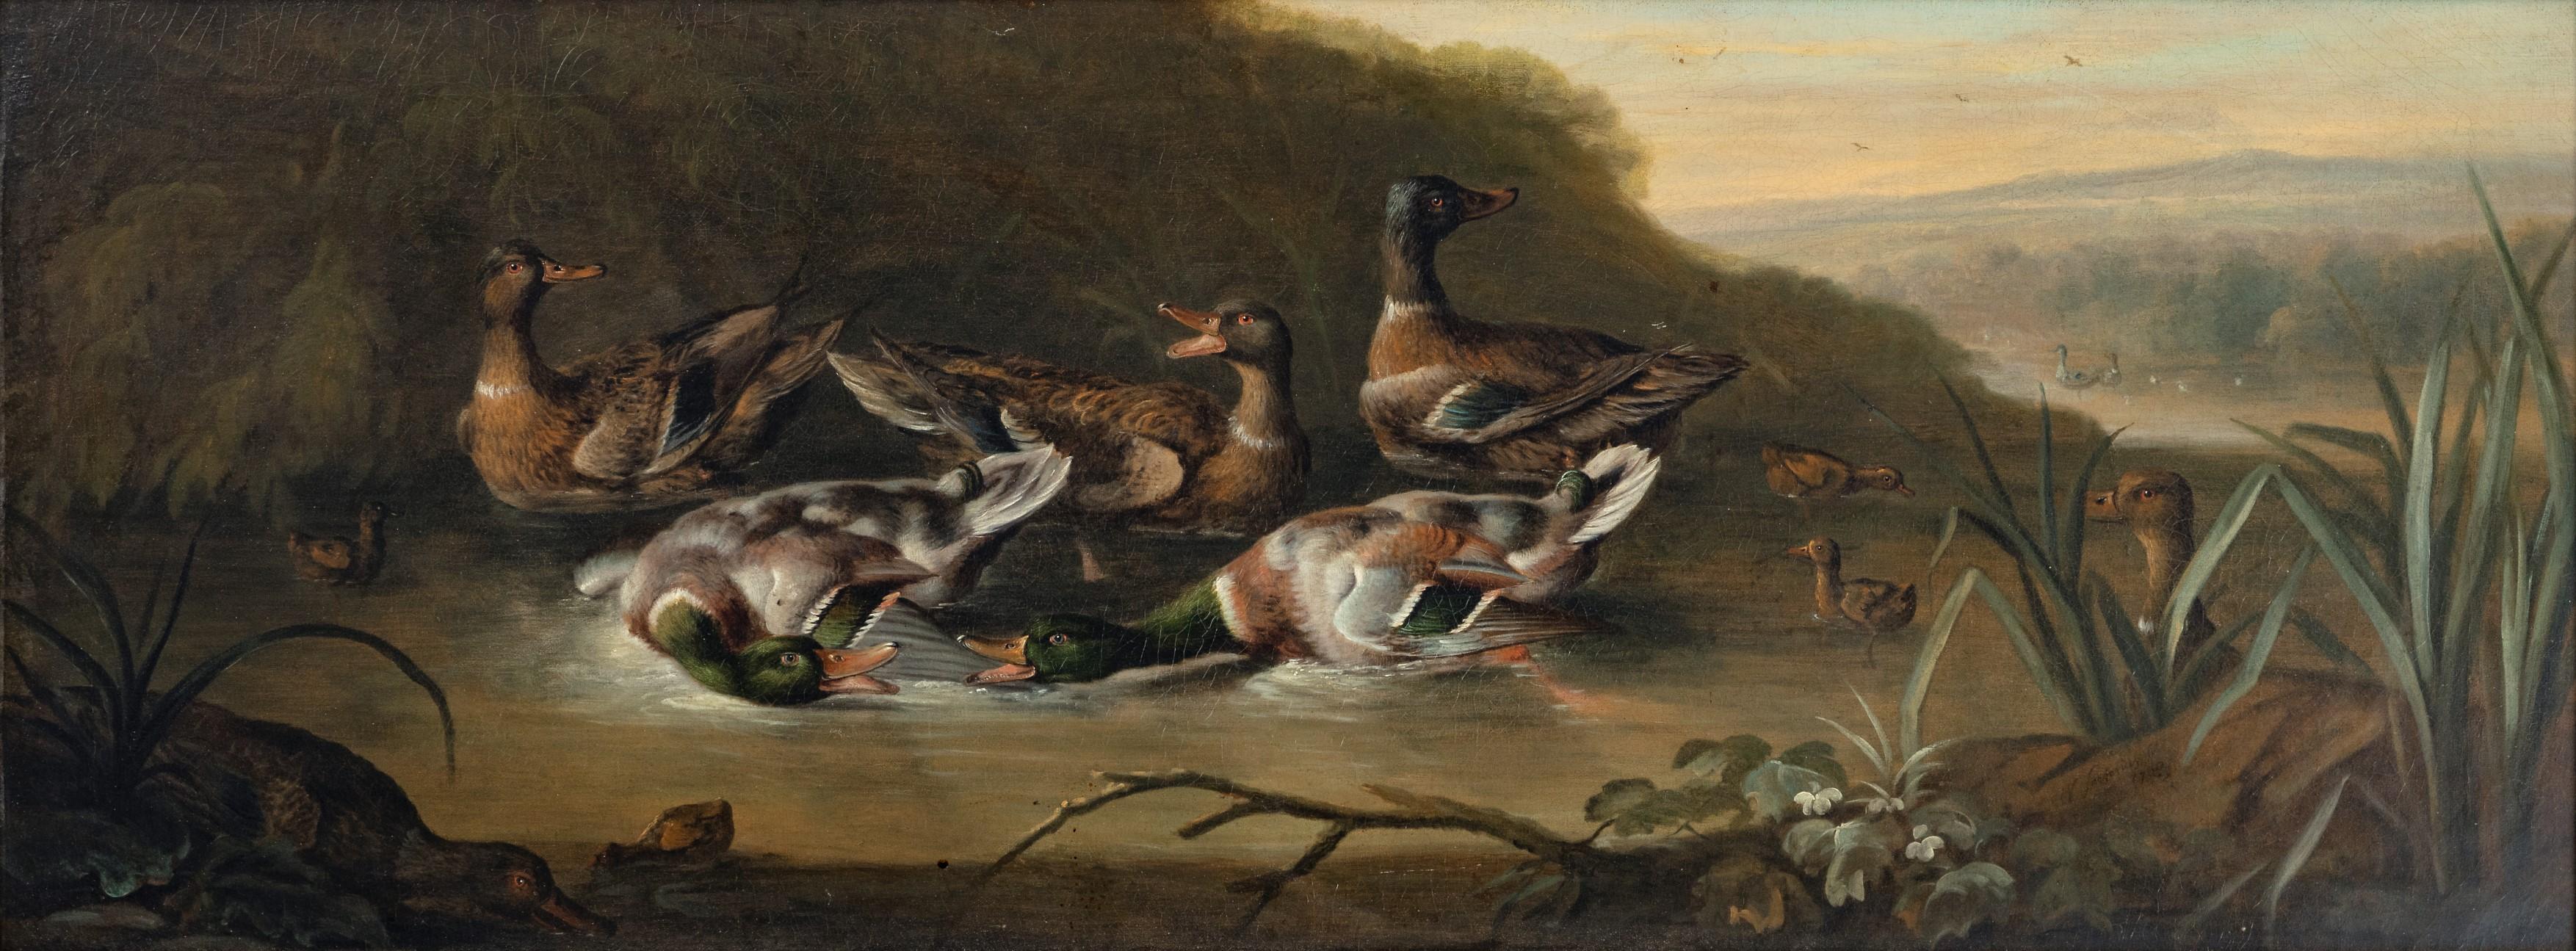 Mallard Drakes with Ducks and Ducklings in a Stream by Sartorius - Painting by George William Sartorius